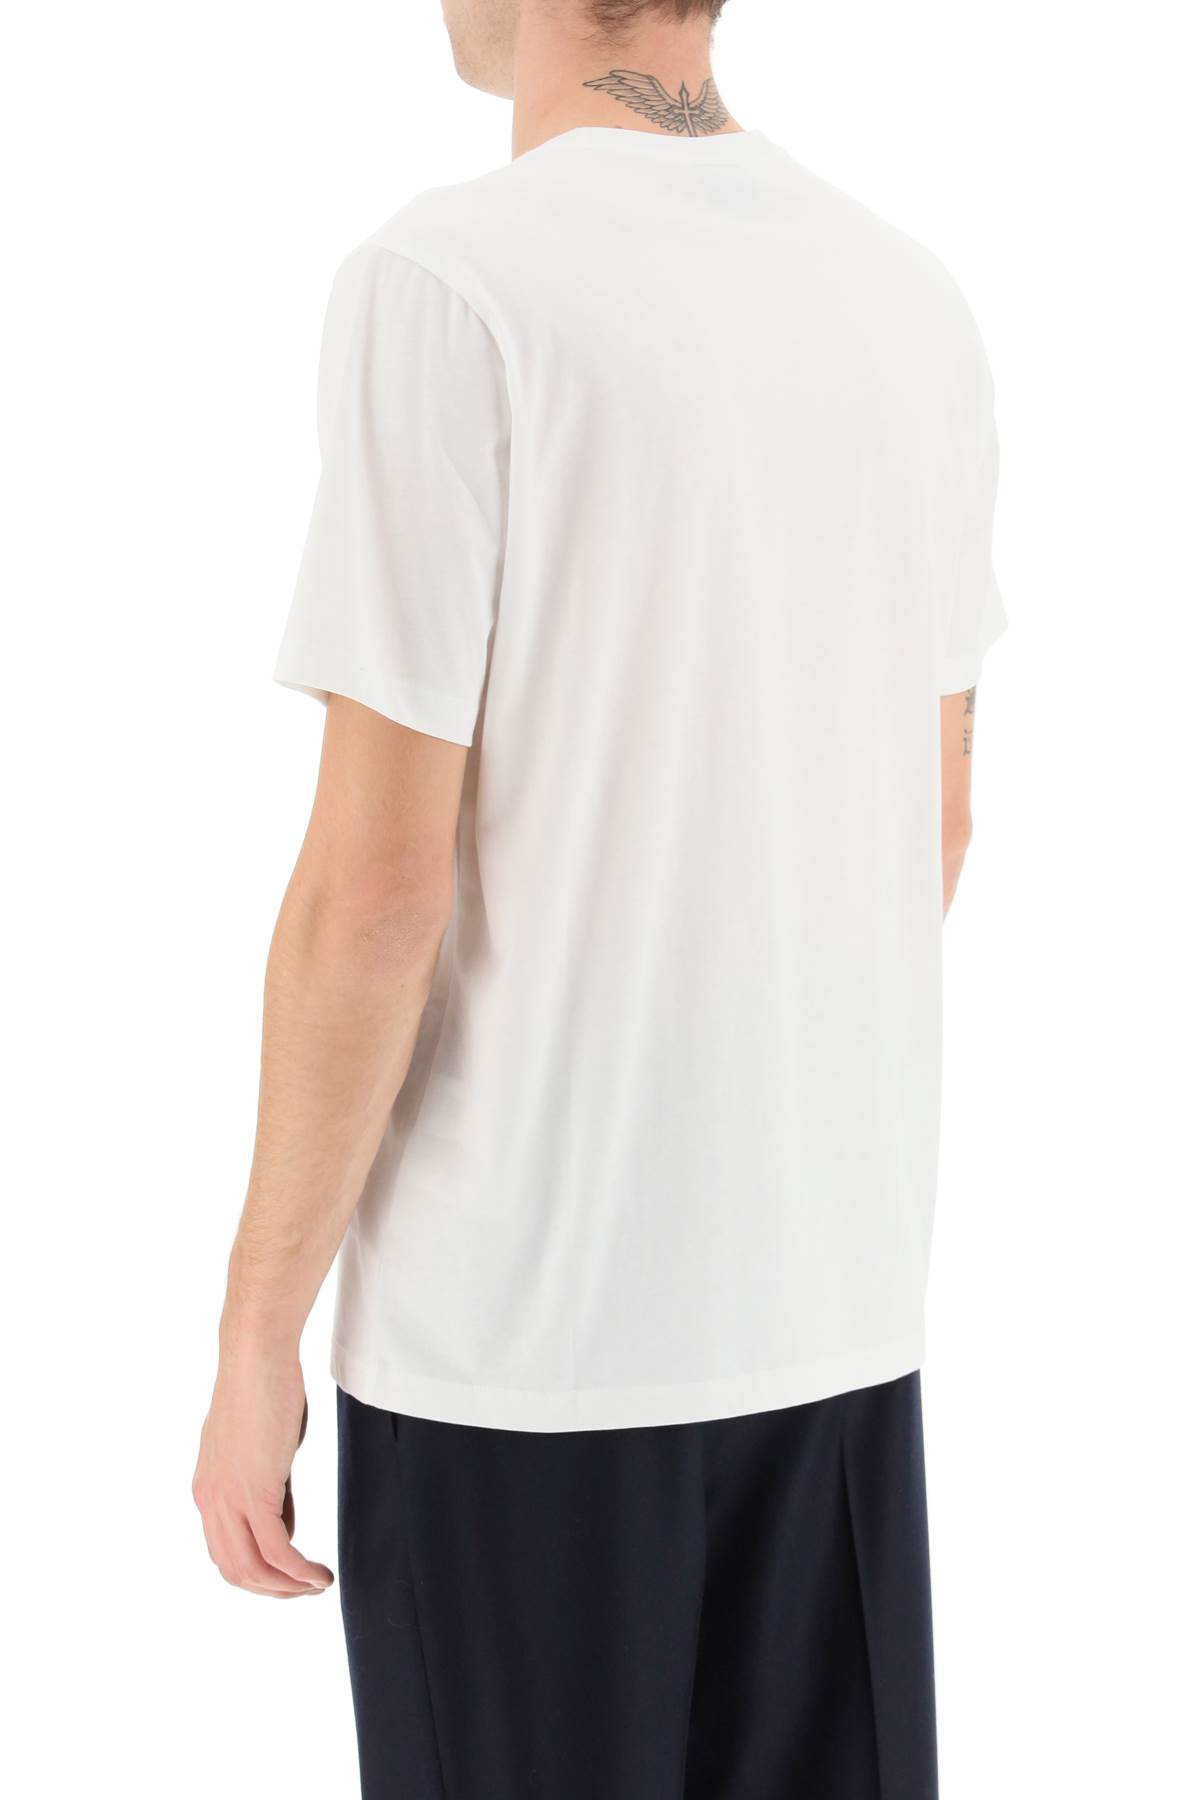 Shop Ps By Paul Smith Organic Cotton T-shirt In White